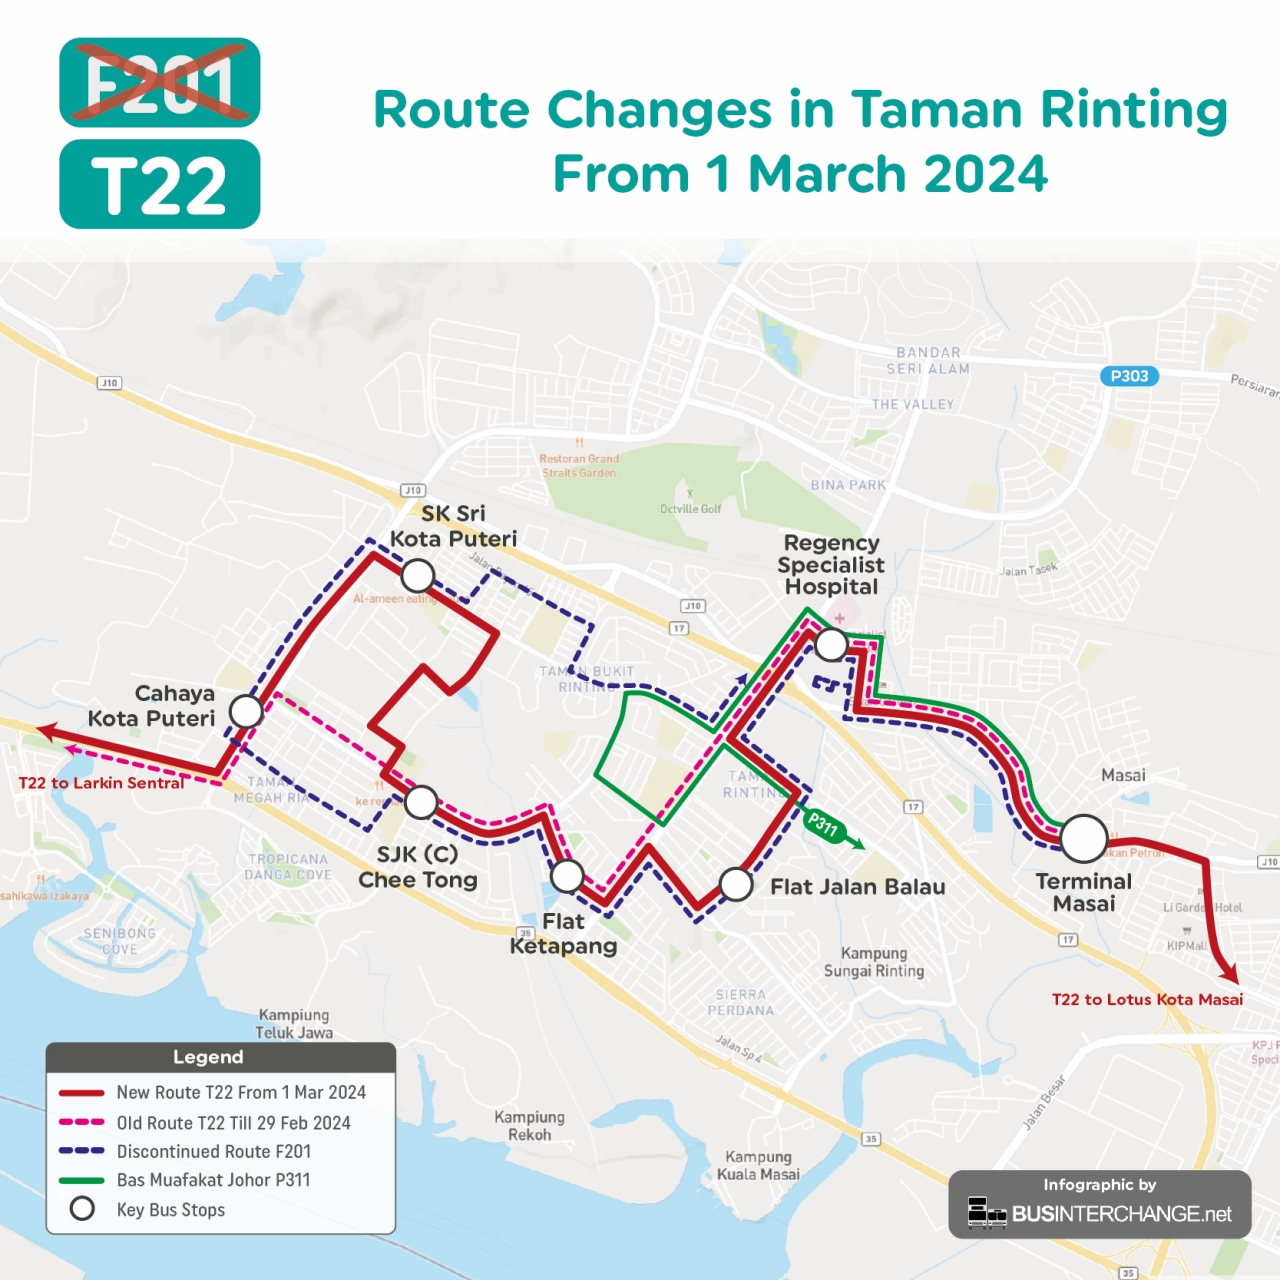 myBas Johor Bahru Route T22 amendment to cover most of the discontinued F201's route from 1 March 2024